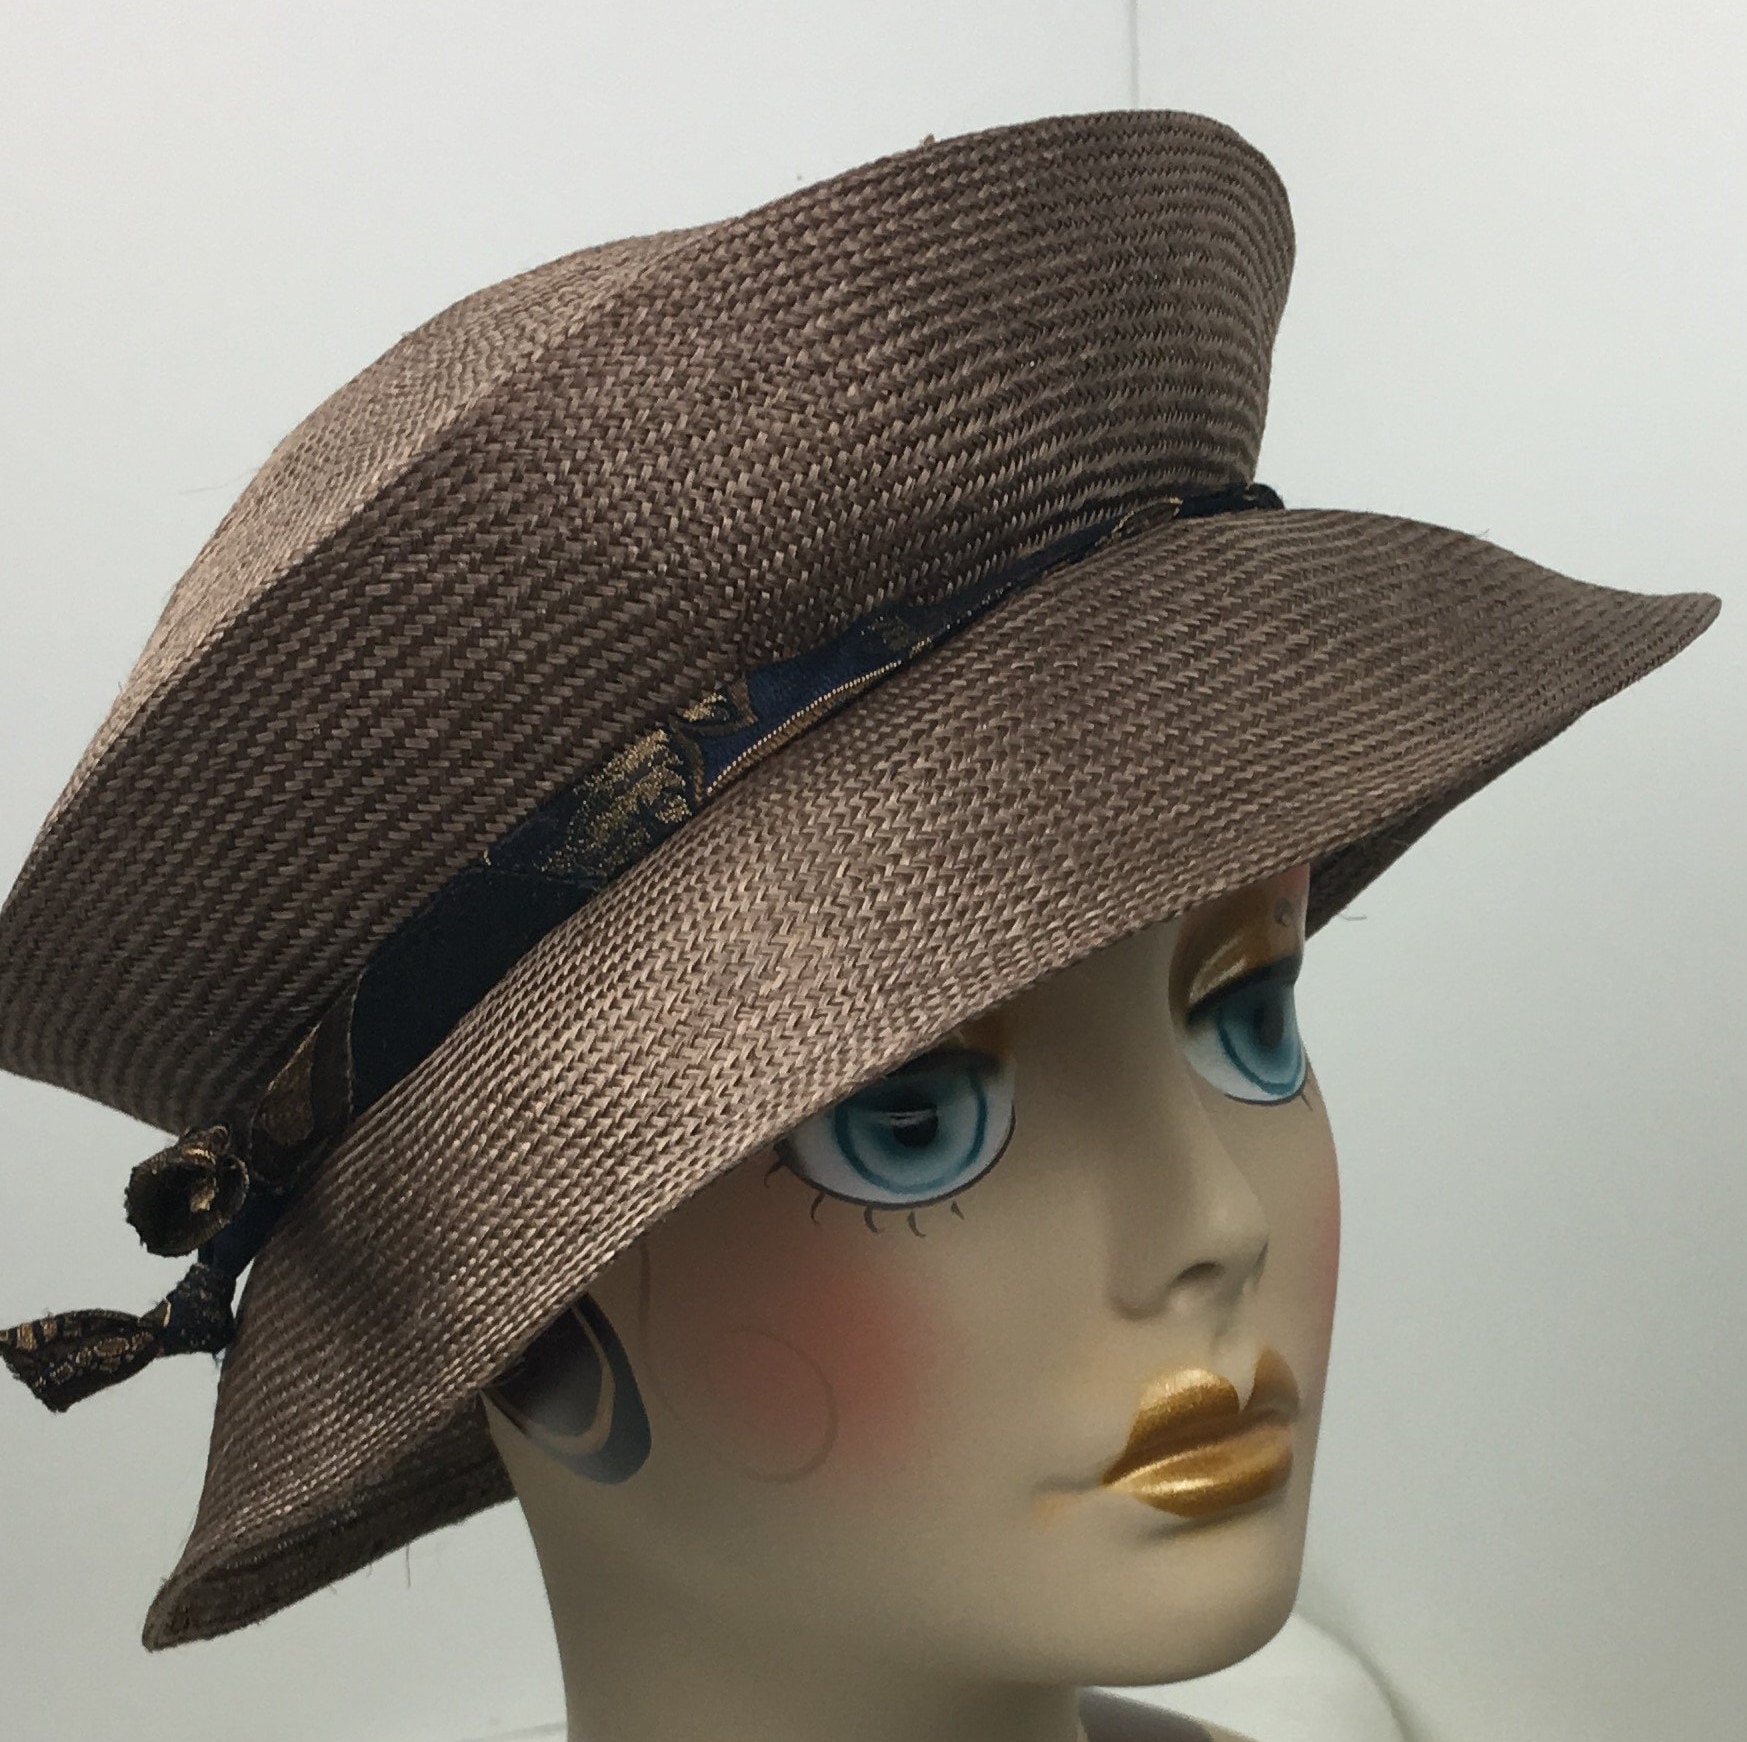 Parasisal Straw Travel/folding Hat Cocoa/Taupe BrownWoman's Summer Hat ...